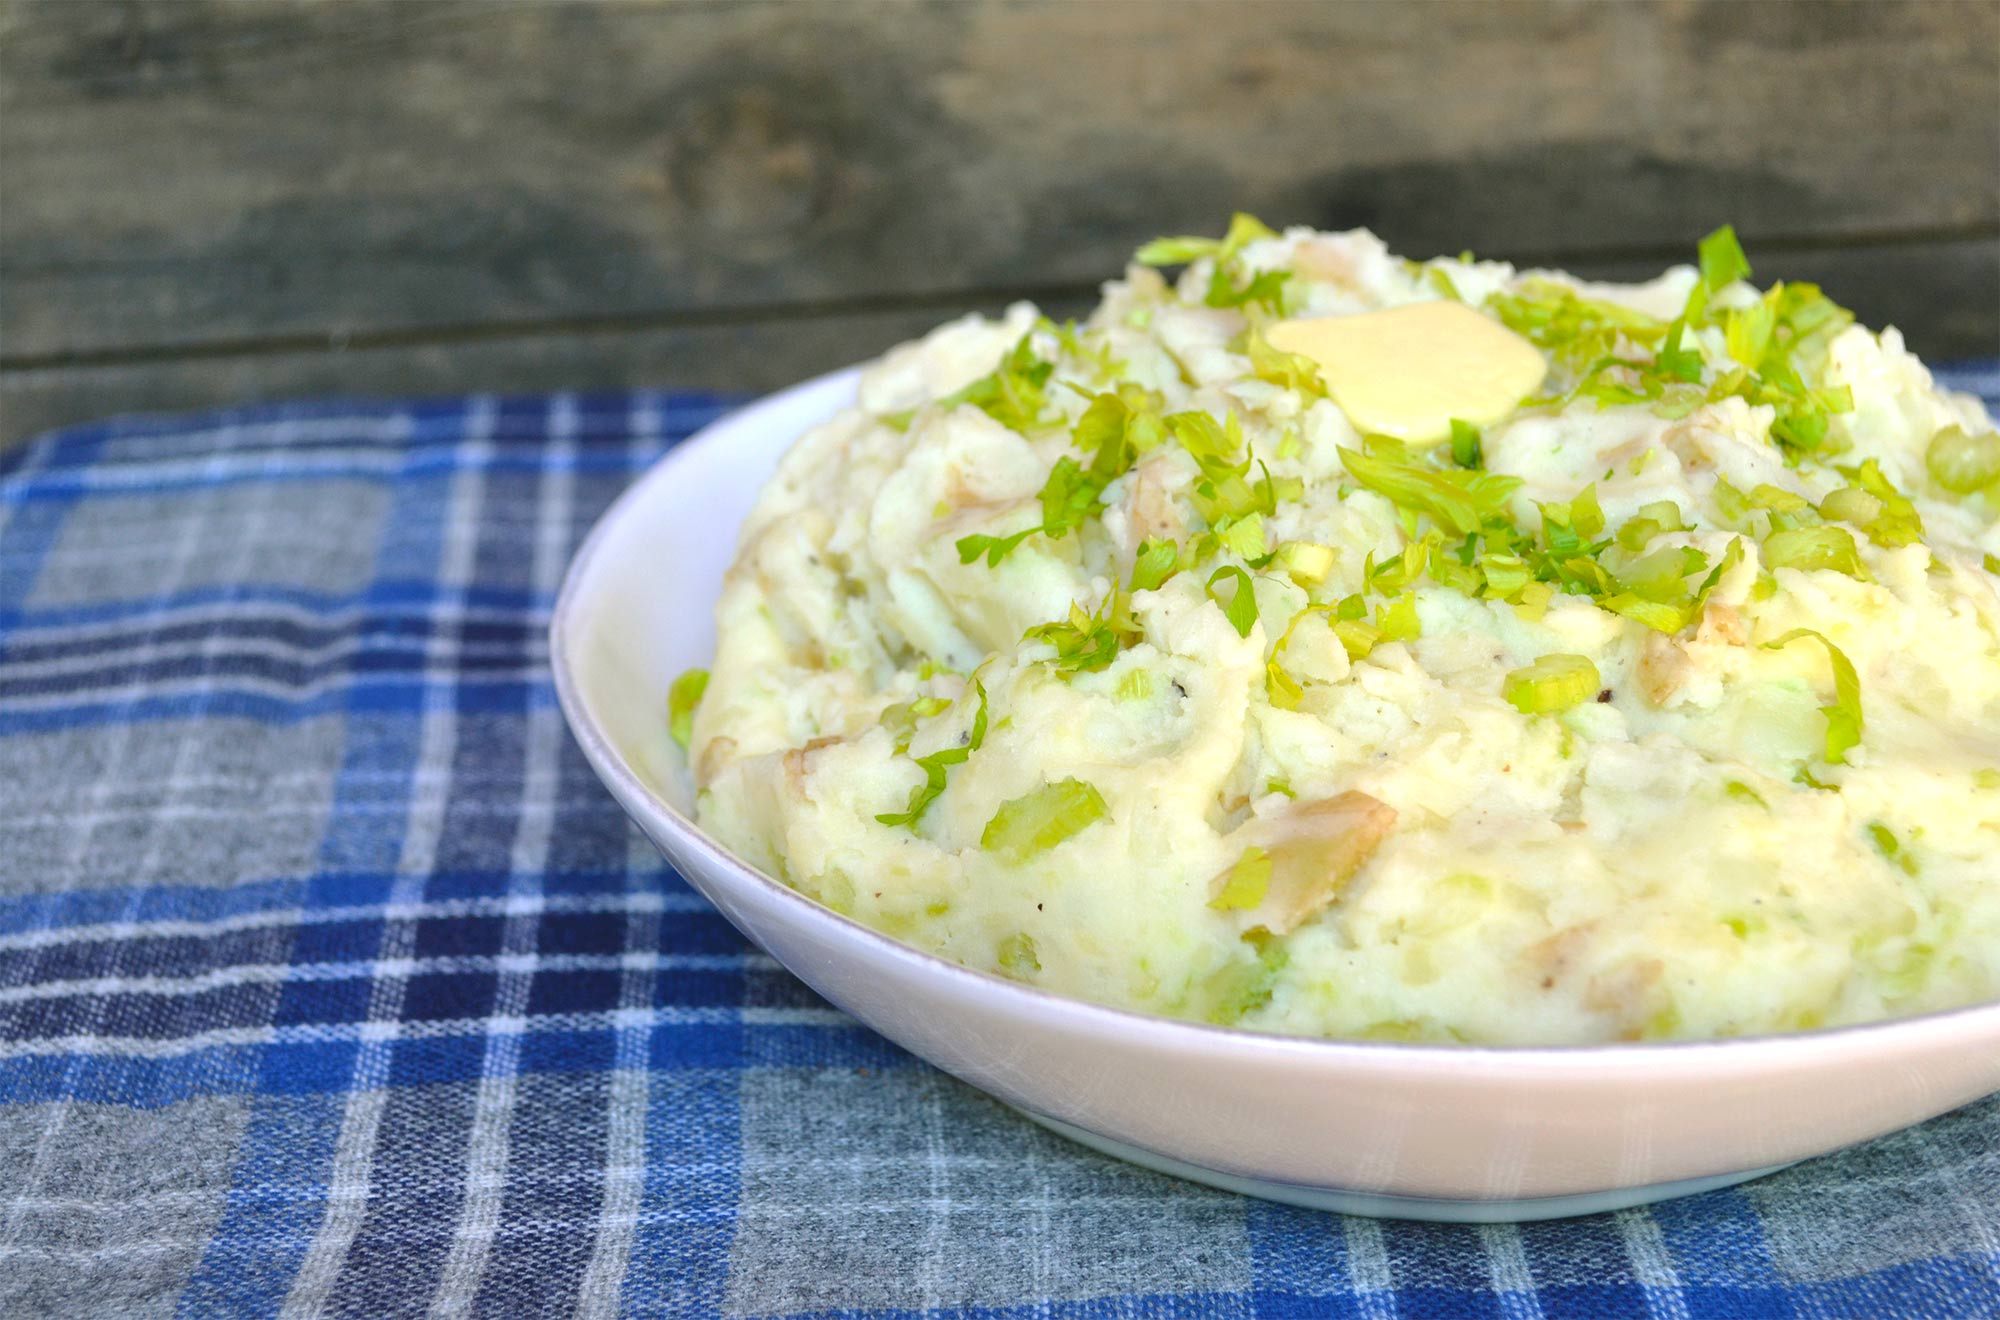 Mashed Potatoes with Celery